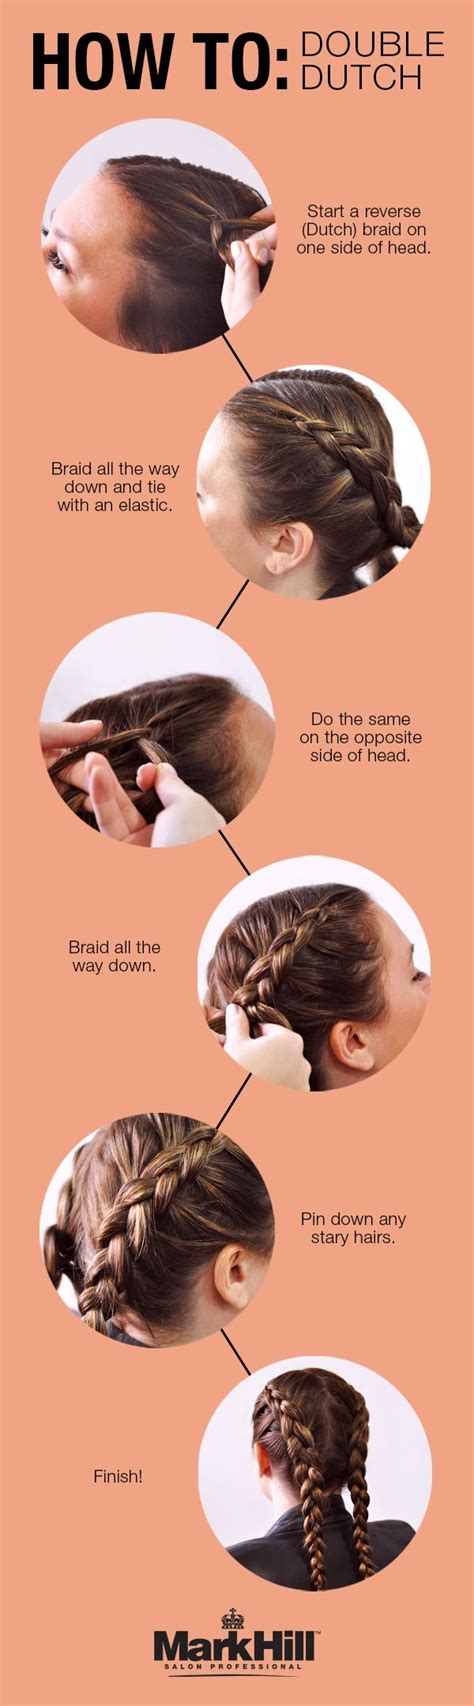 Beginner dutch braid updo hairstyle learn how to braid your own hair. This double Dutch braid how-to is so quick you'll have ...